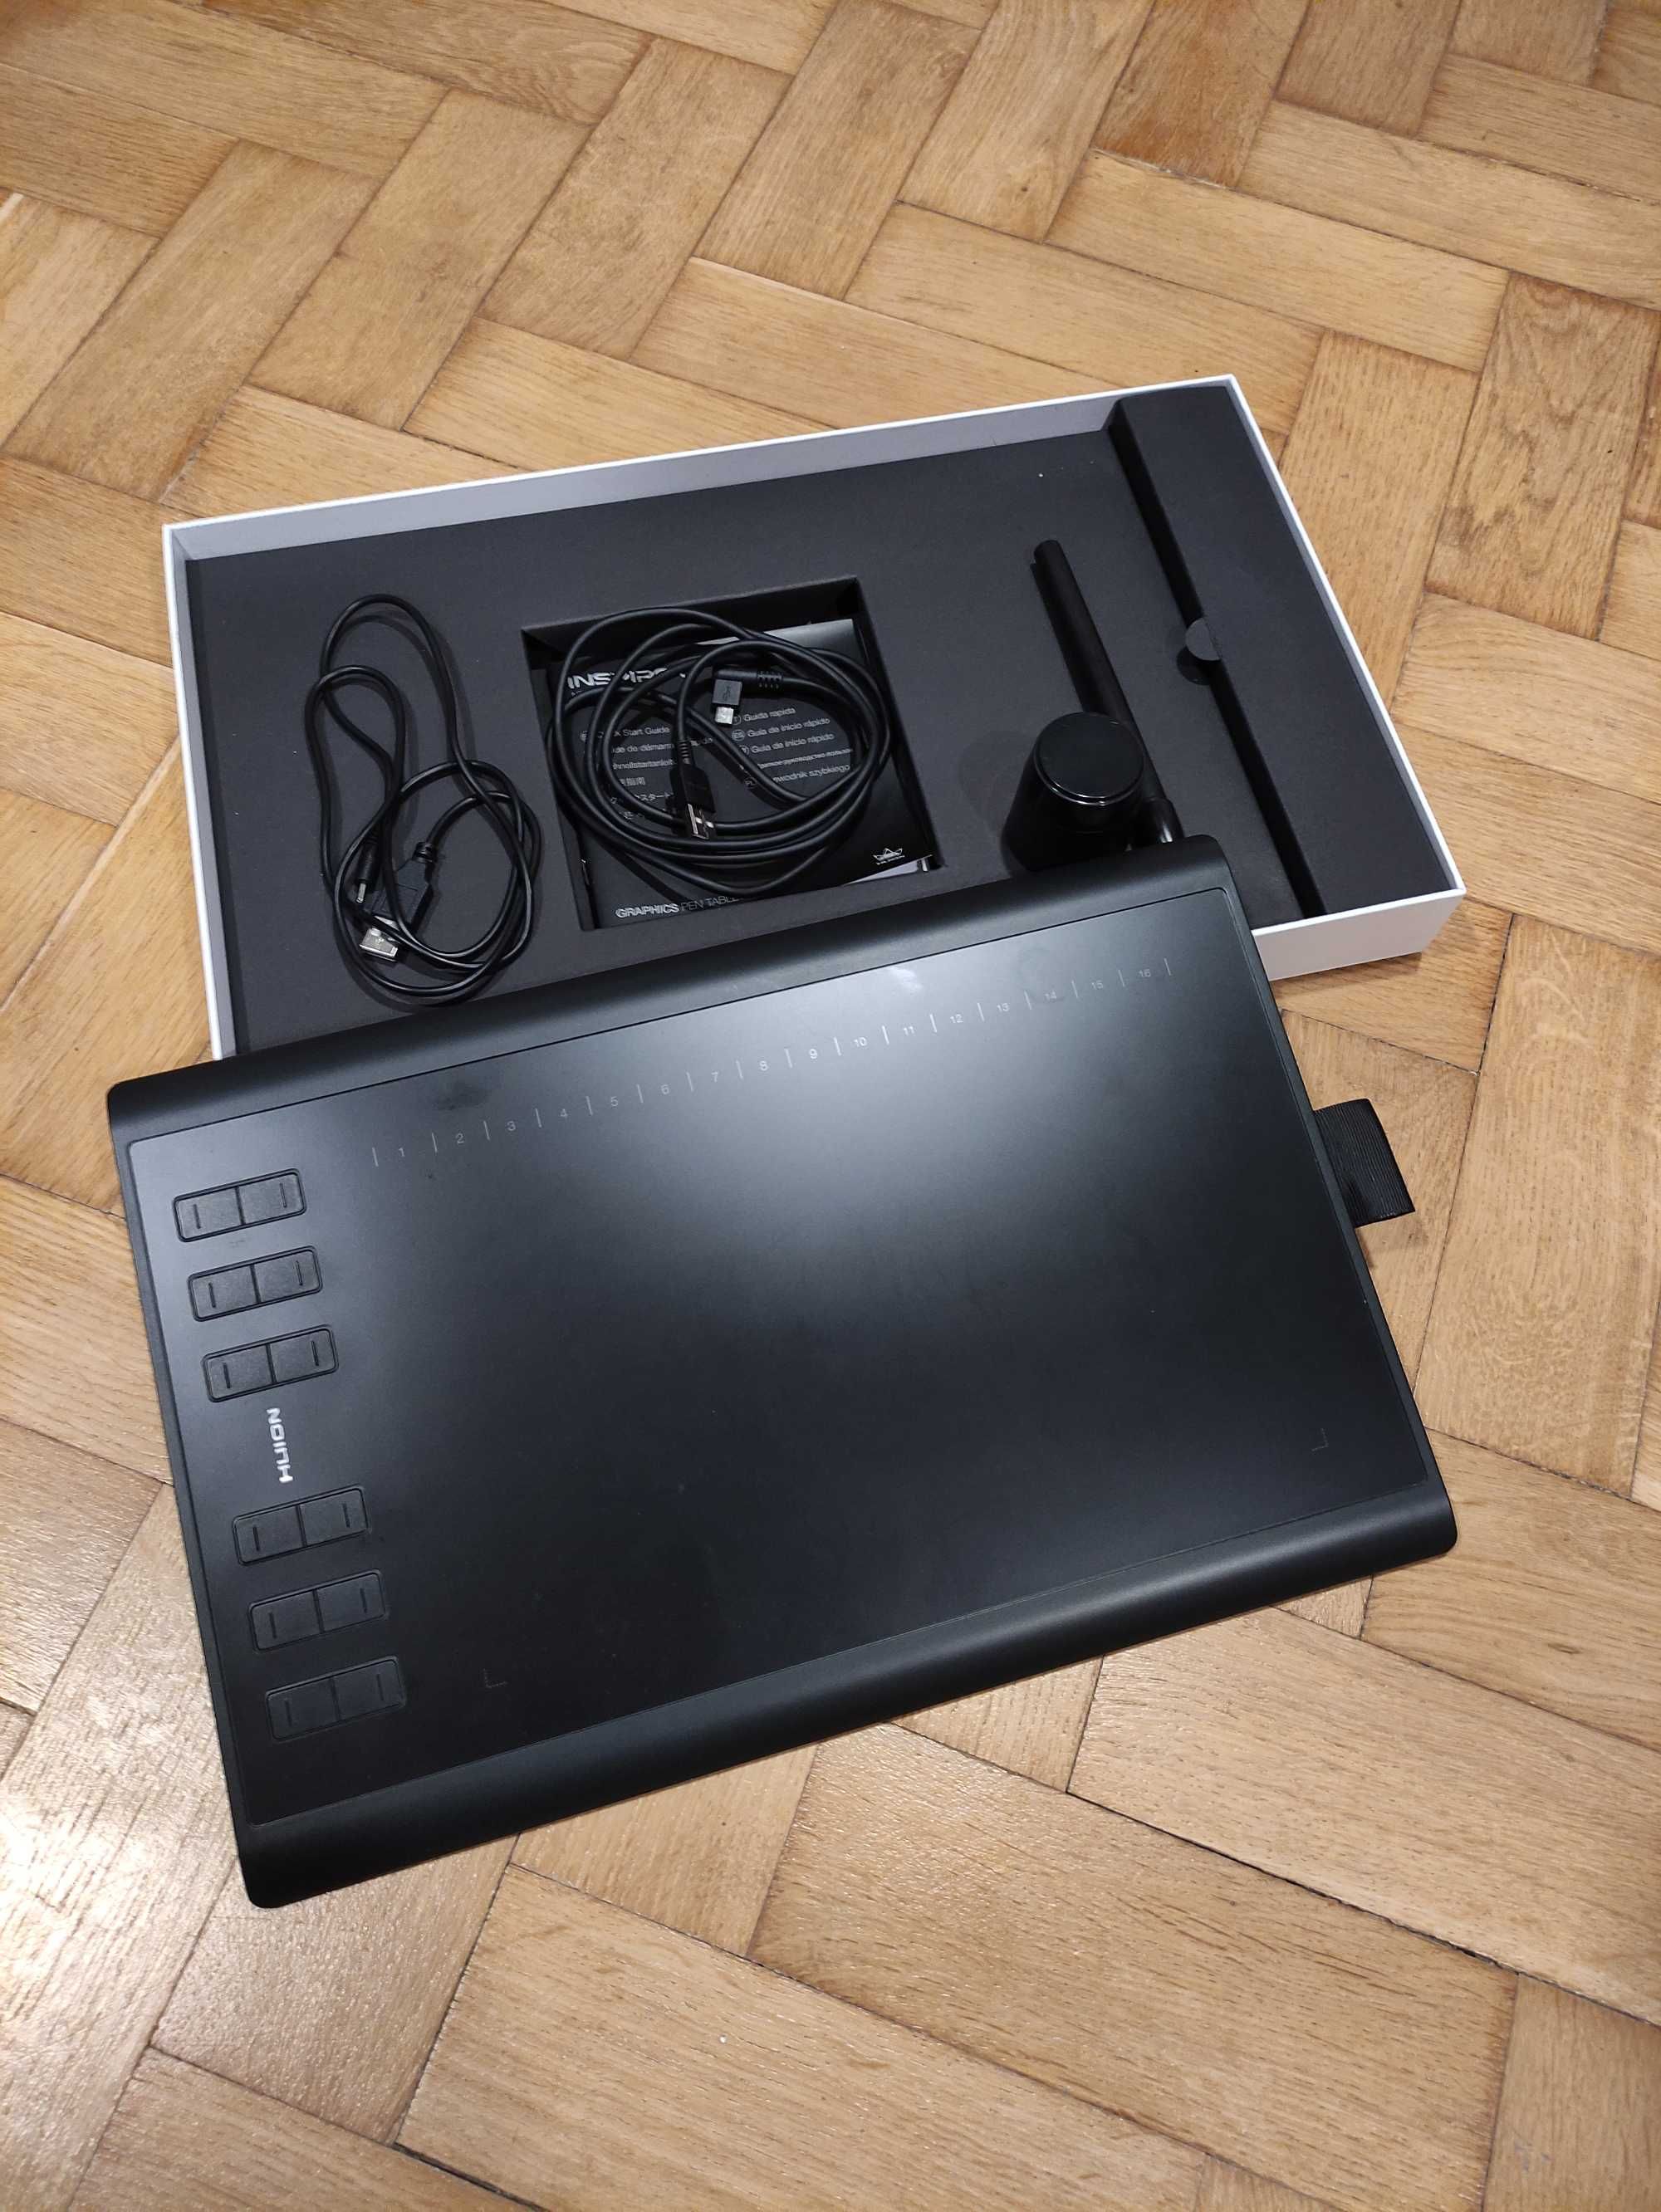 Tablet Huion new 1060 plus